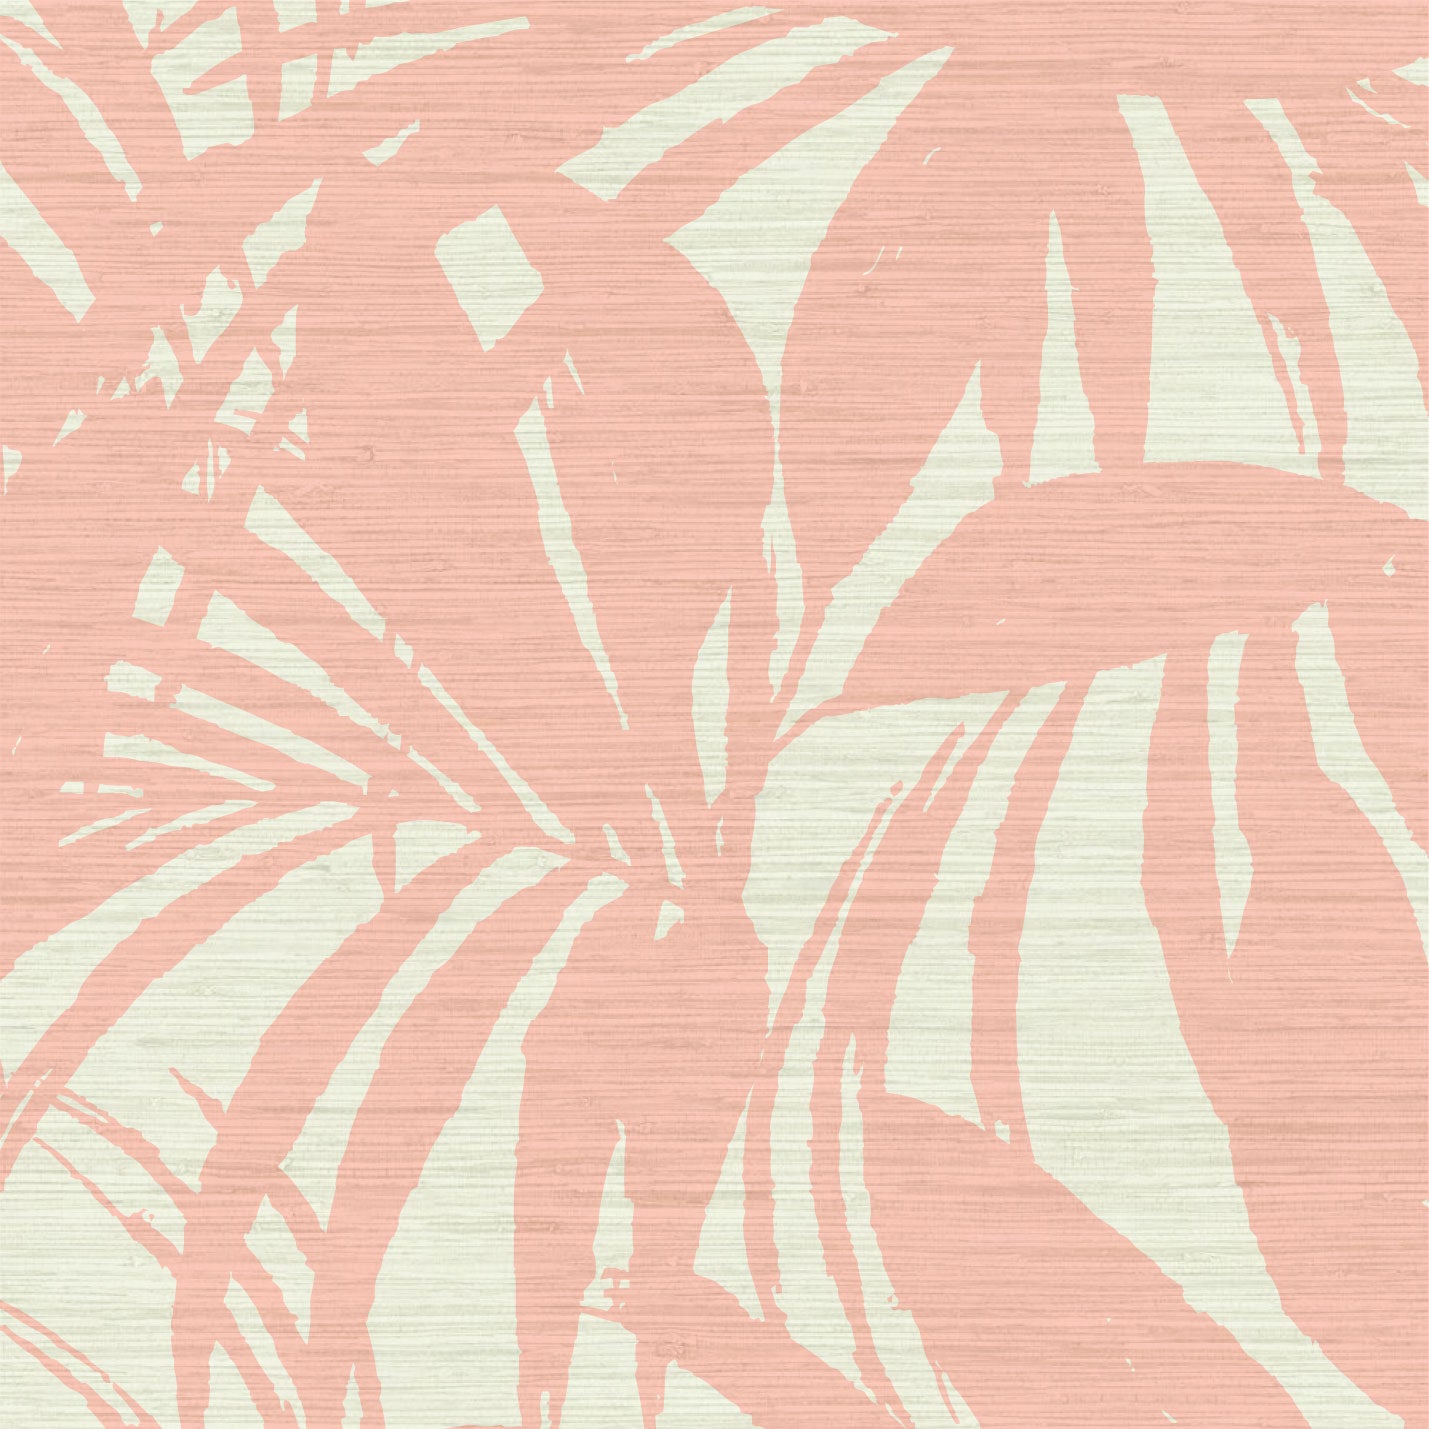 printed grasscloth wallpaper oversize tropical leaf Natural Textured Eco-Friendly Non-toxic High-quality  Sustainable practices Sustainability Interior Design Wall covering Bold retro chic custom jungle garden botanical Seaside Coastal Seashore Waterfront Vacation home styling Retreat Relaxed beach vibes Beach cottage Shoreline Oceanfront white peach pink coral pastel baby orange